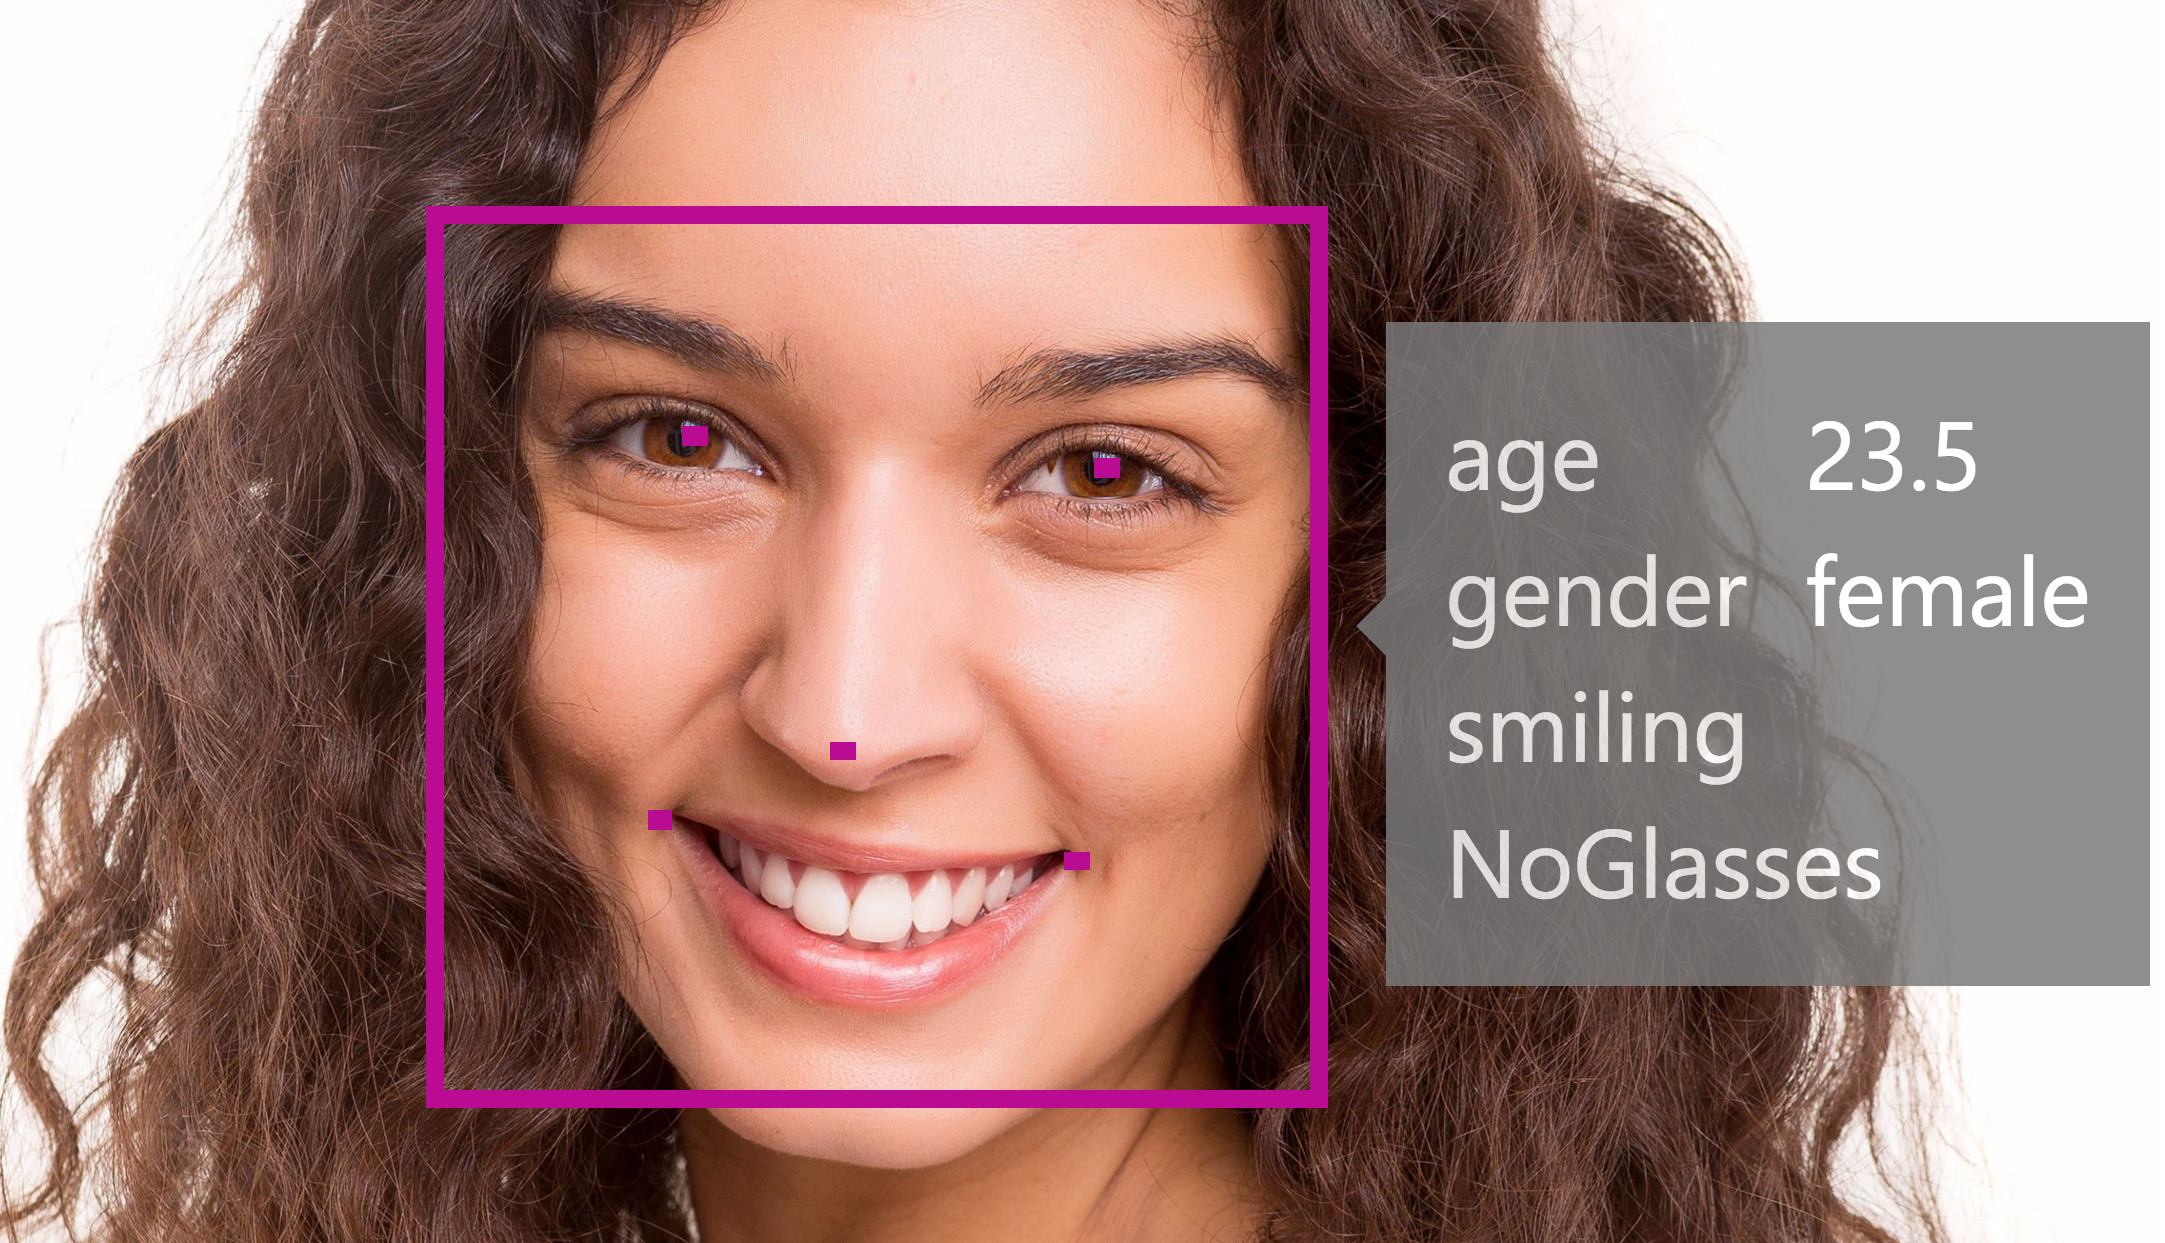 Facial Attribute Detection with Microsoft's Face API